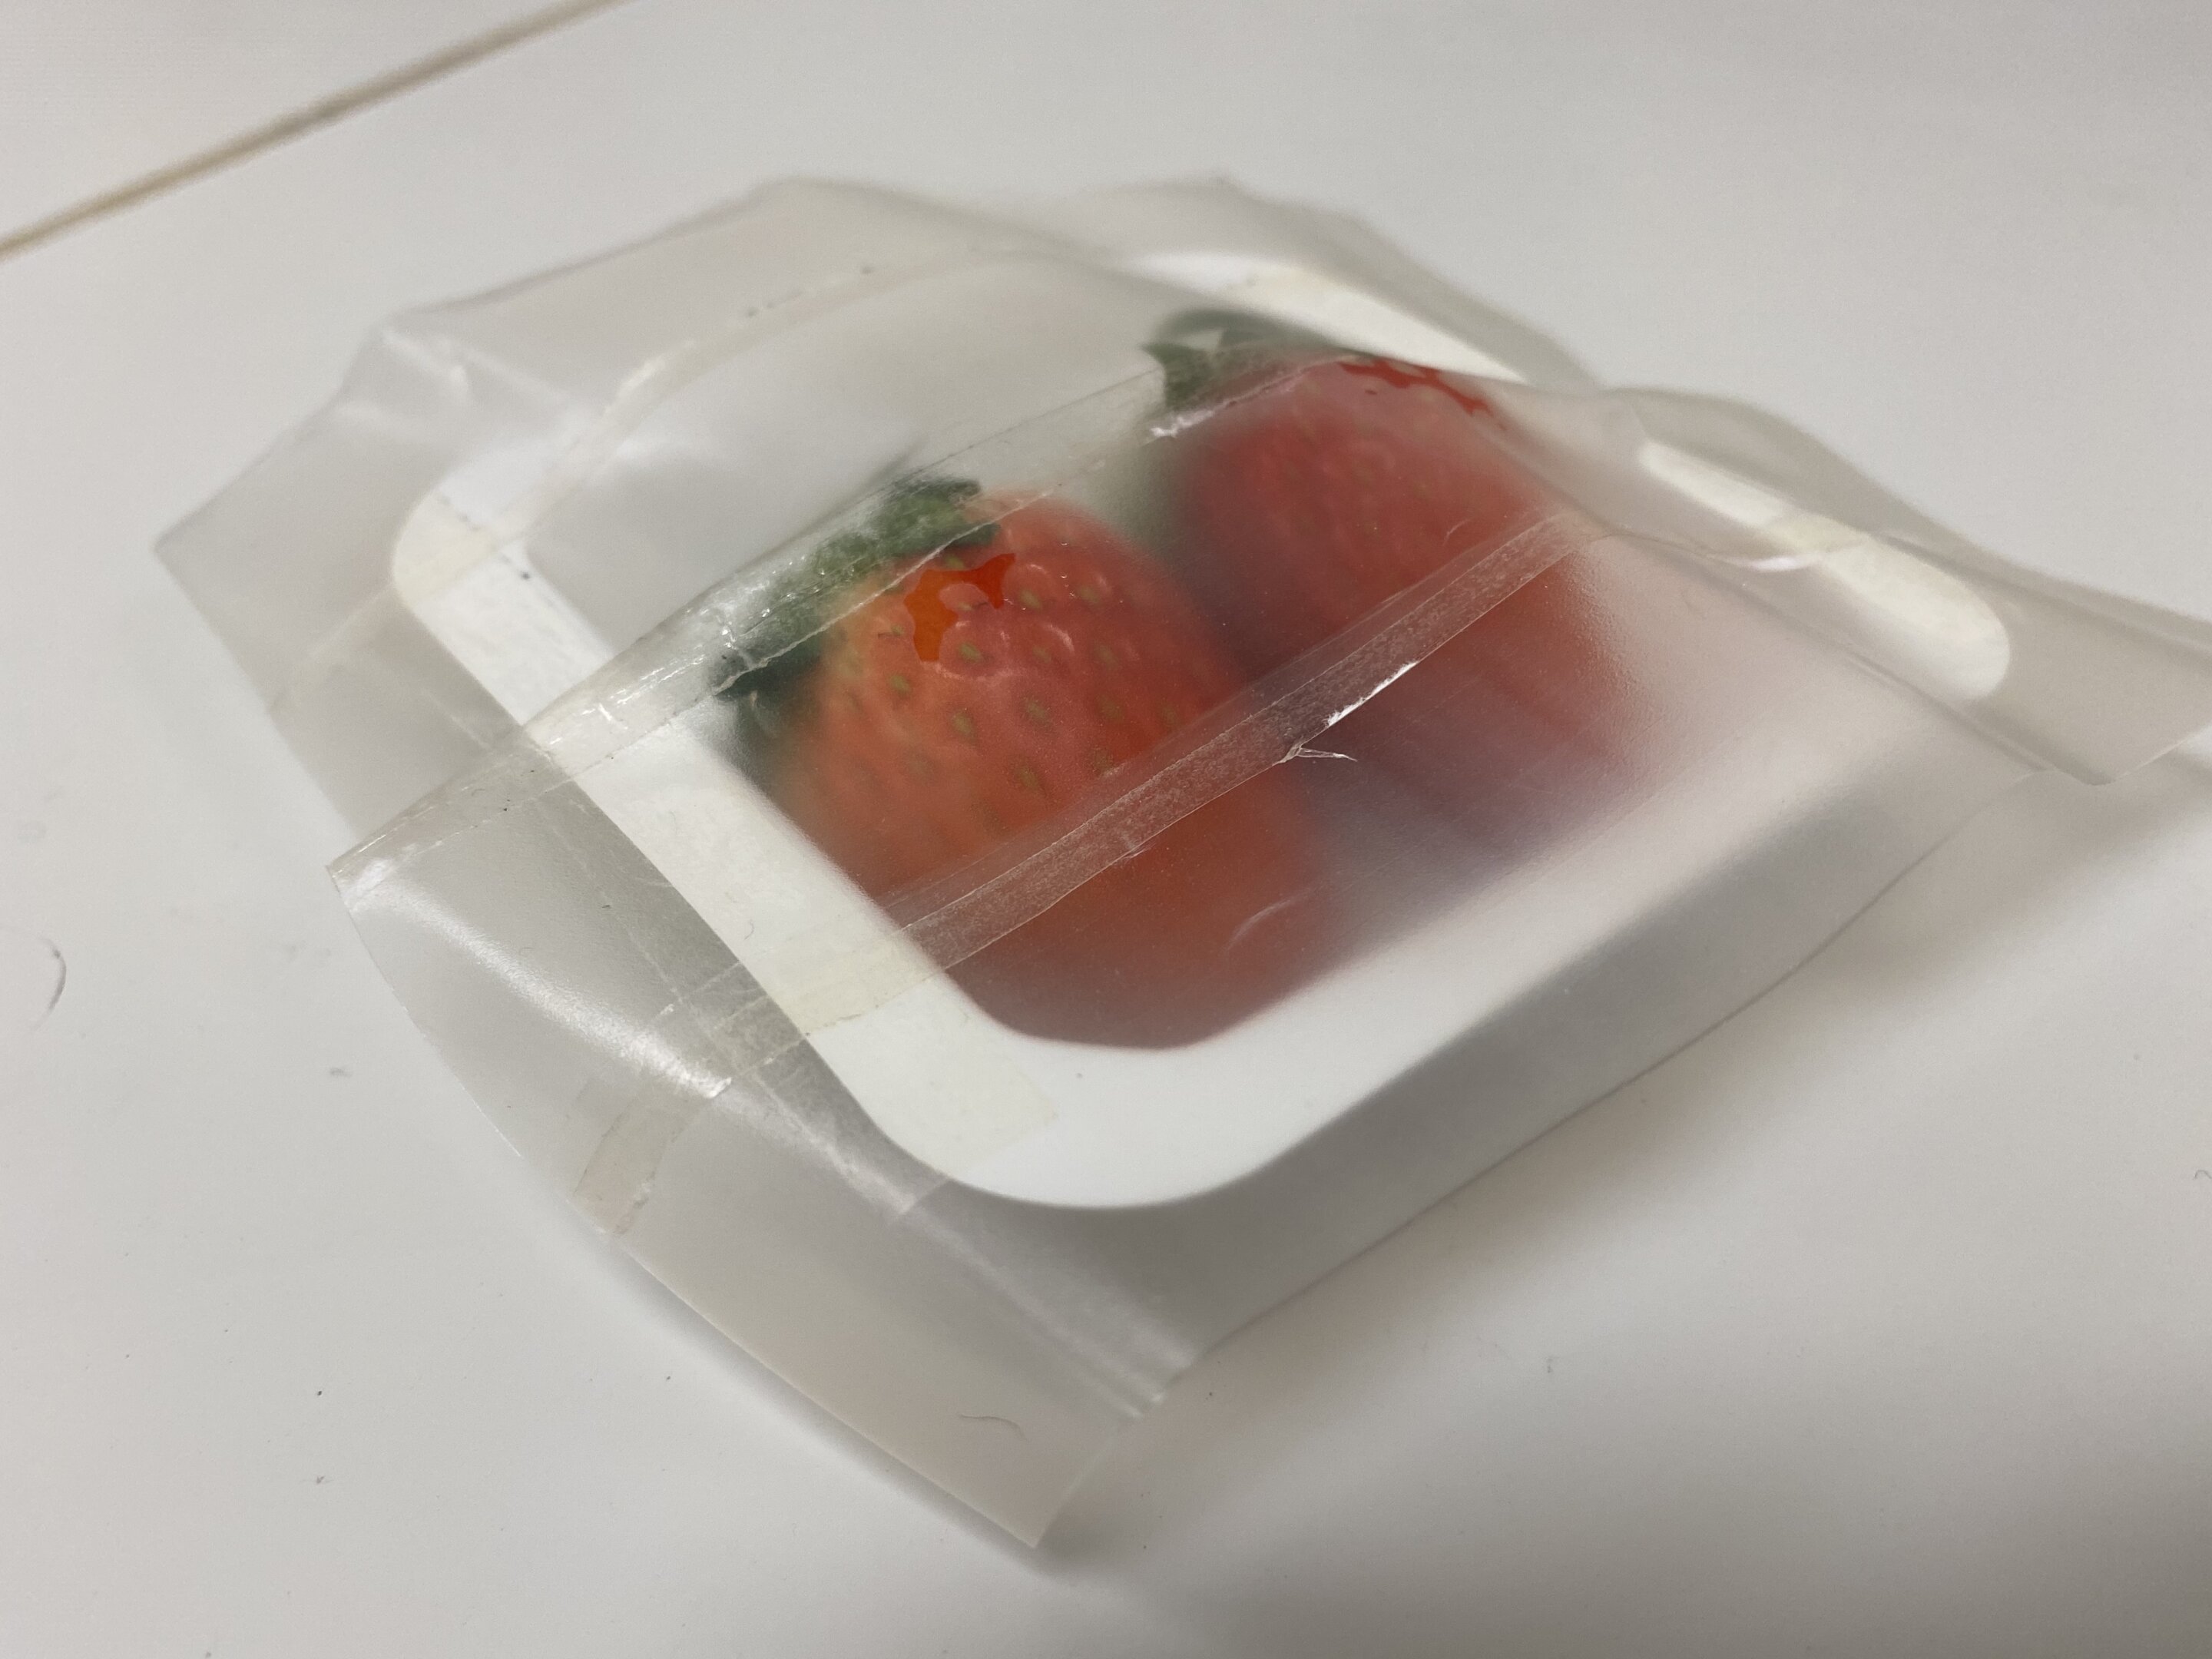 Sustainable food packaging that keeps harmful microbes at bay